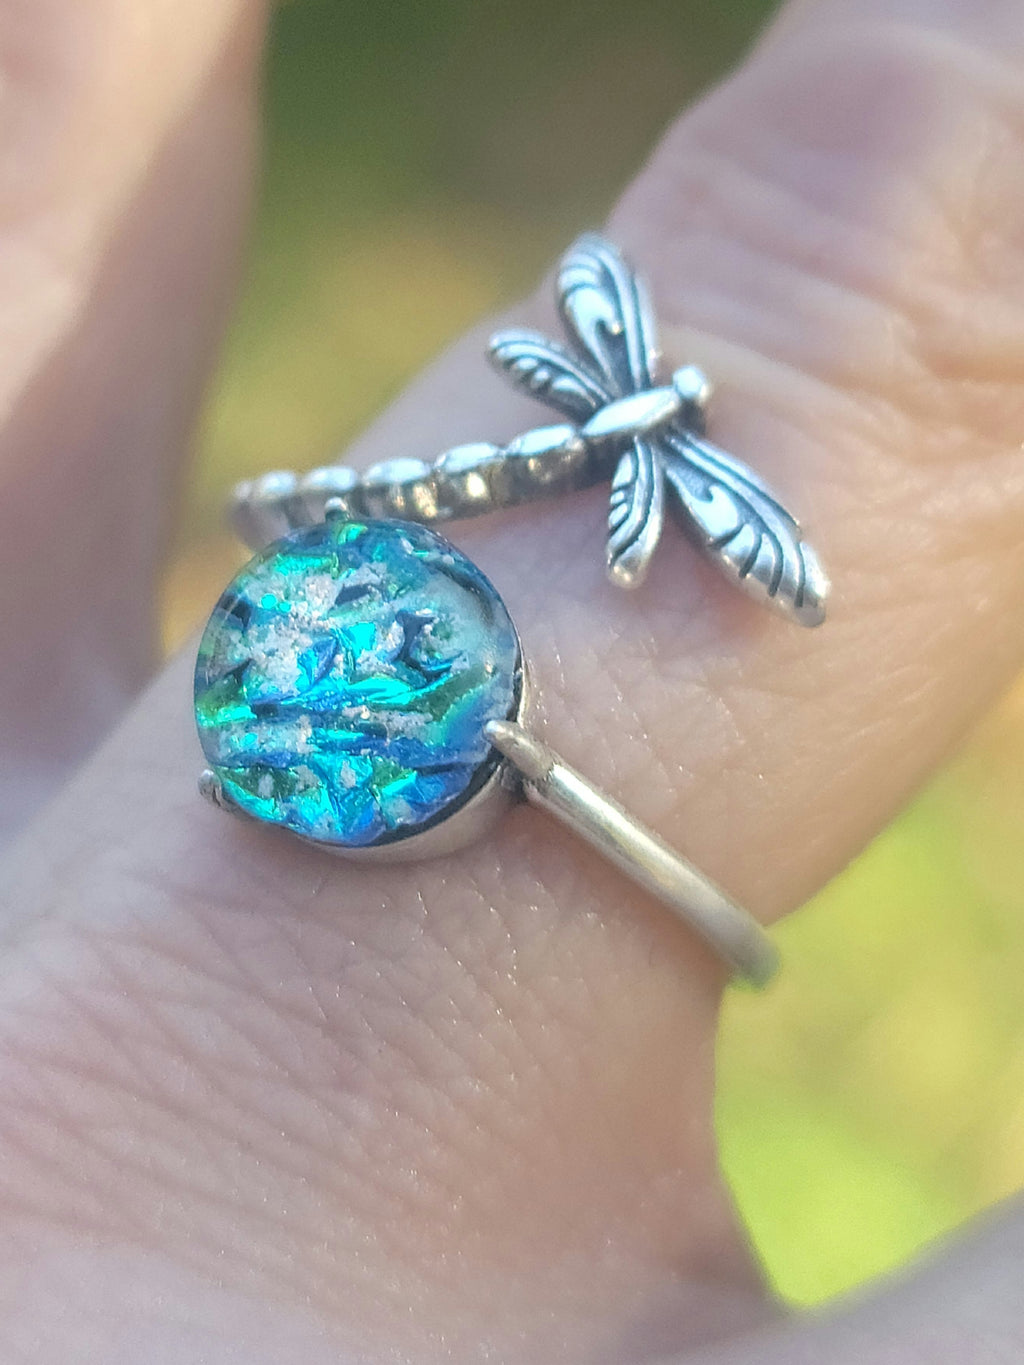 NEW Dragonfly Cremation Ring for Ashes InFused Glass Hard Sterling Silver Urn Adjustable Size Fits 6,7,8,9,10 Half Sizing